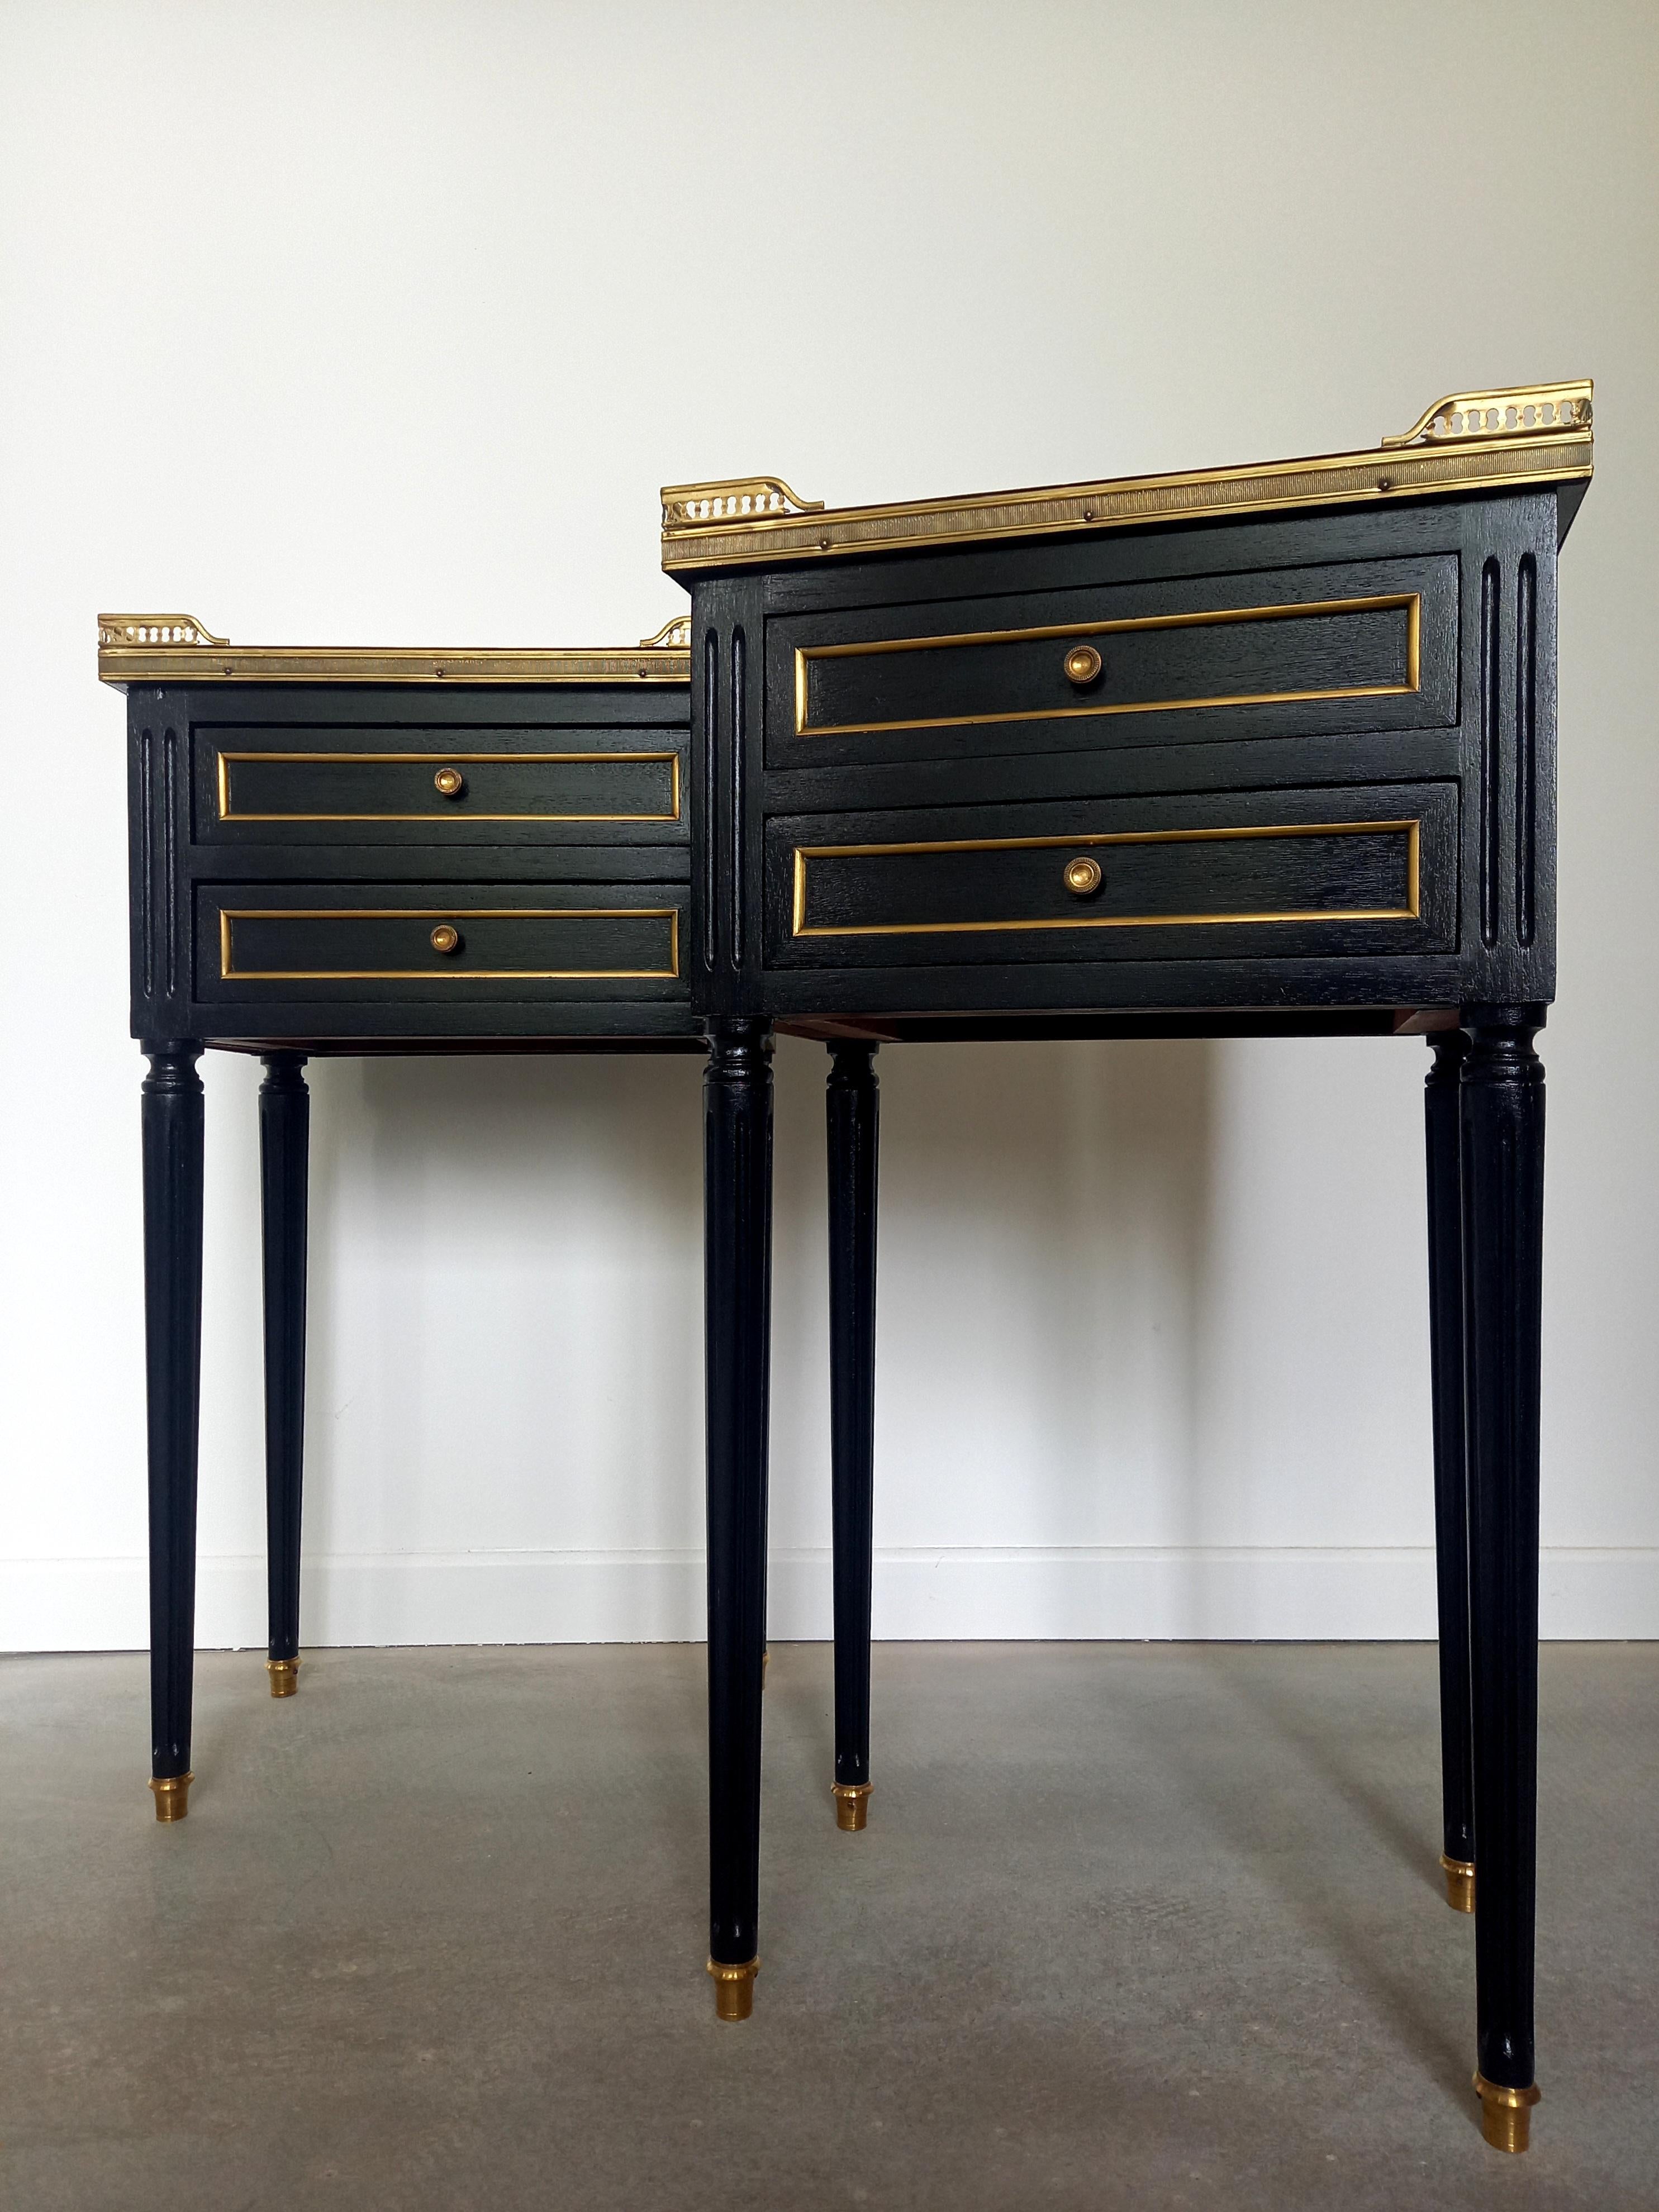 Antique French Louis XVI style pair of nightstands or side tables topped with a Carrara marble, four legs finished with golden bronze clogs.
Brass gallery and two front drawers.